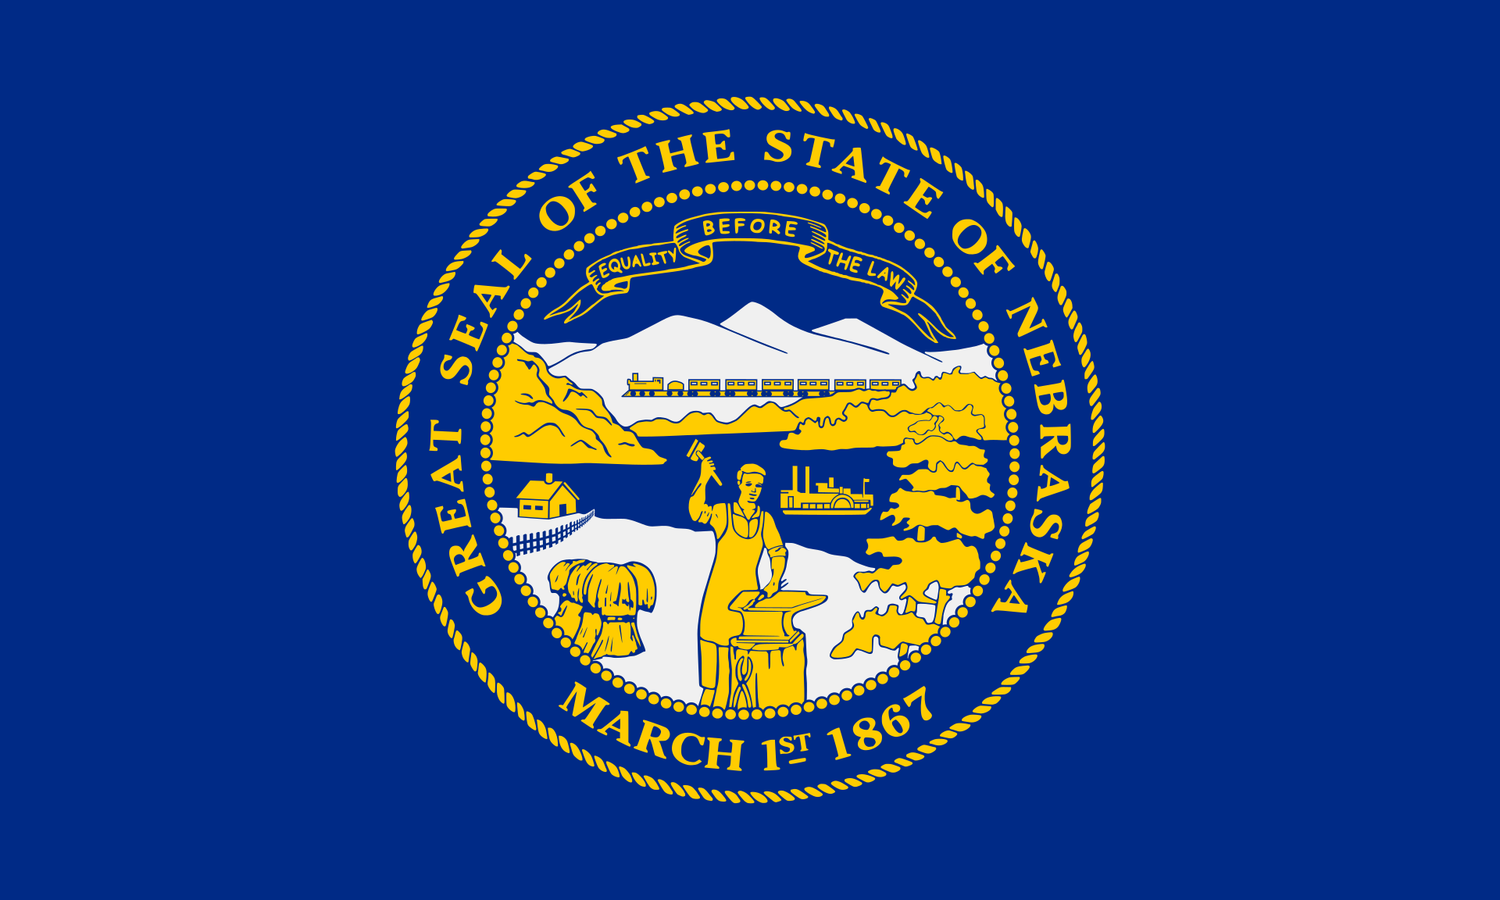 The official state flag of Nebraska was adopted in 1963 and features the state seal in gold and silver on a field of blue. - History By Mail